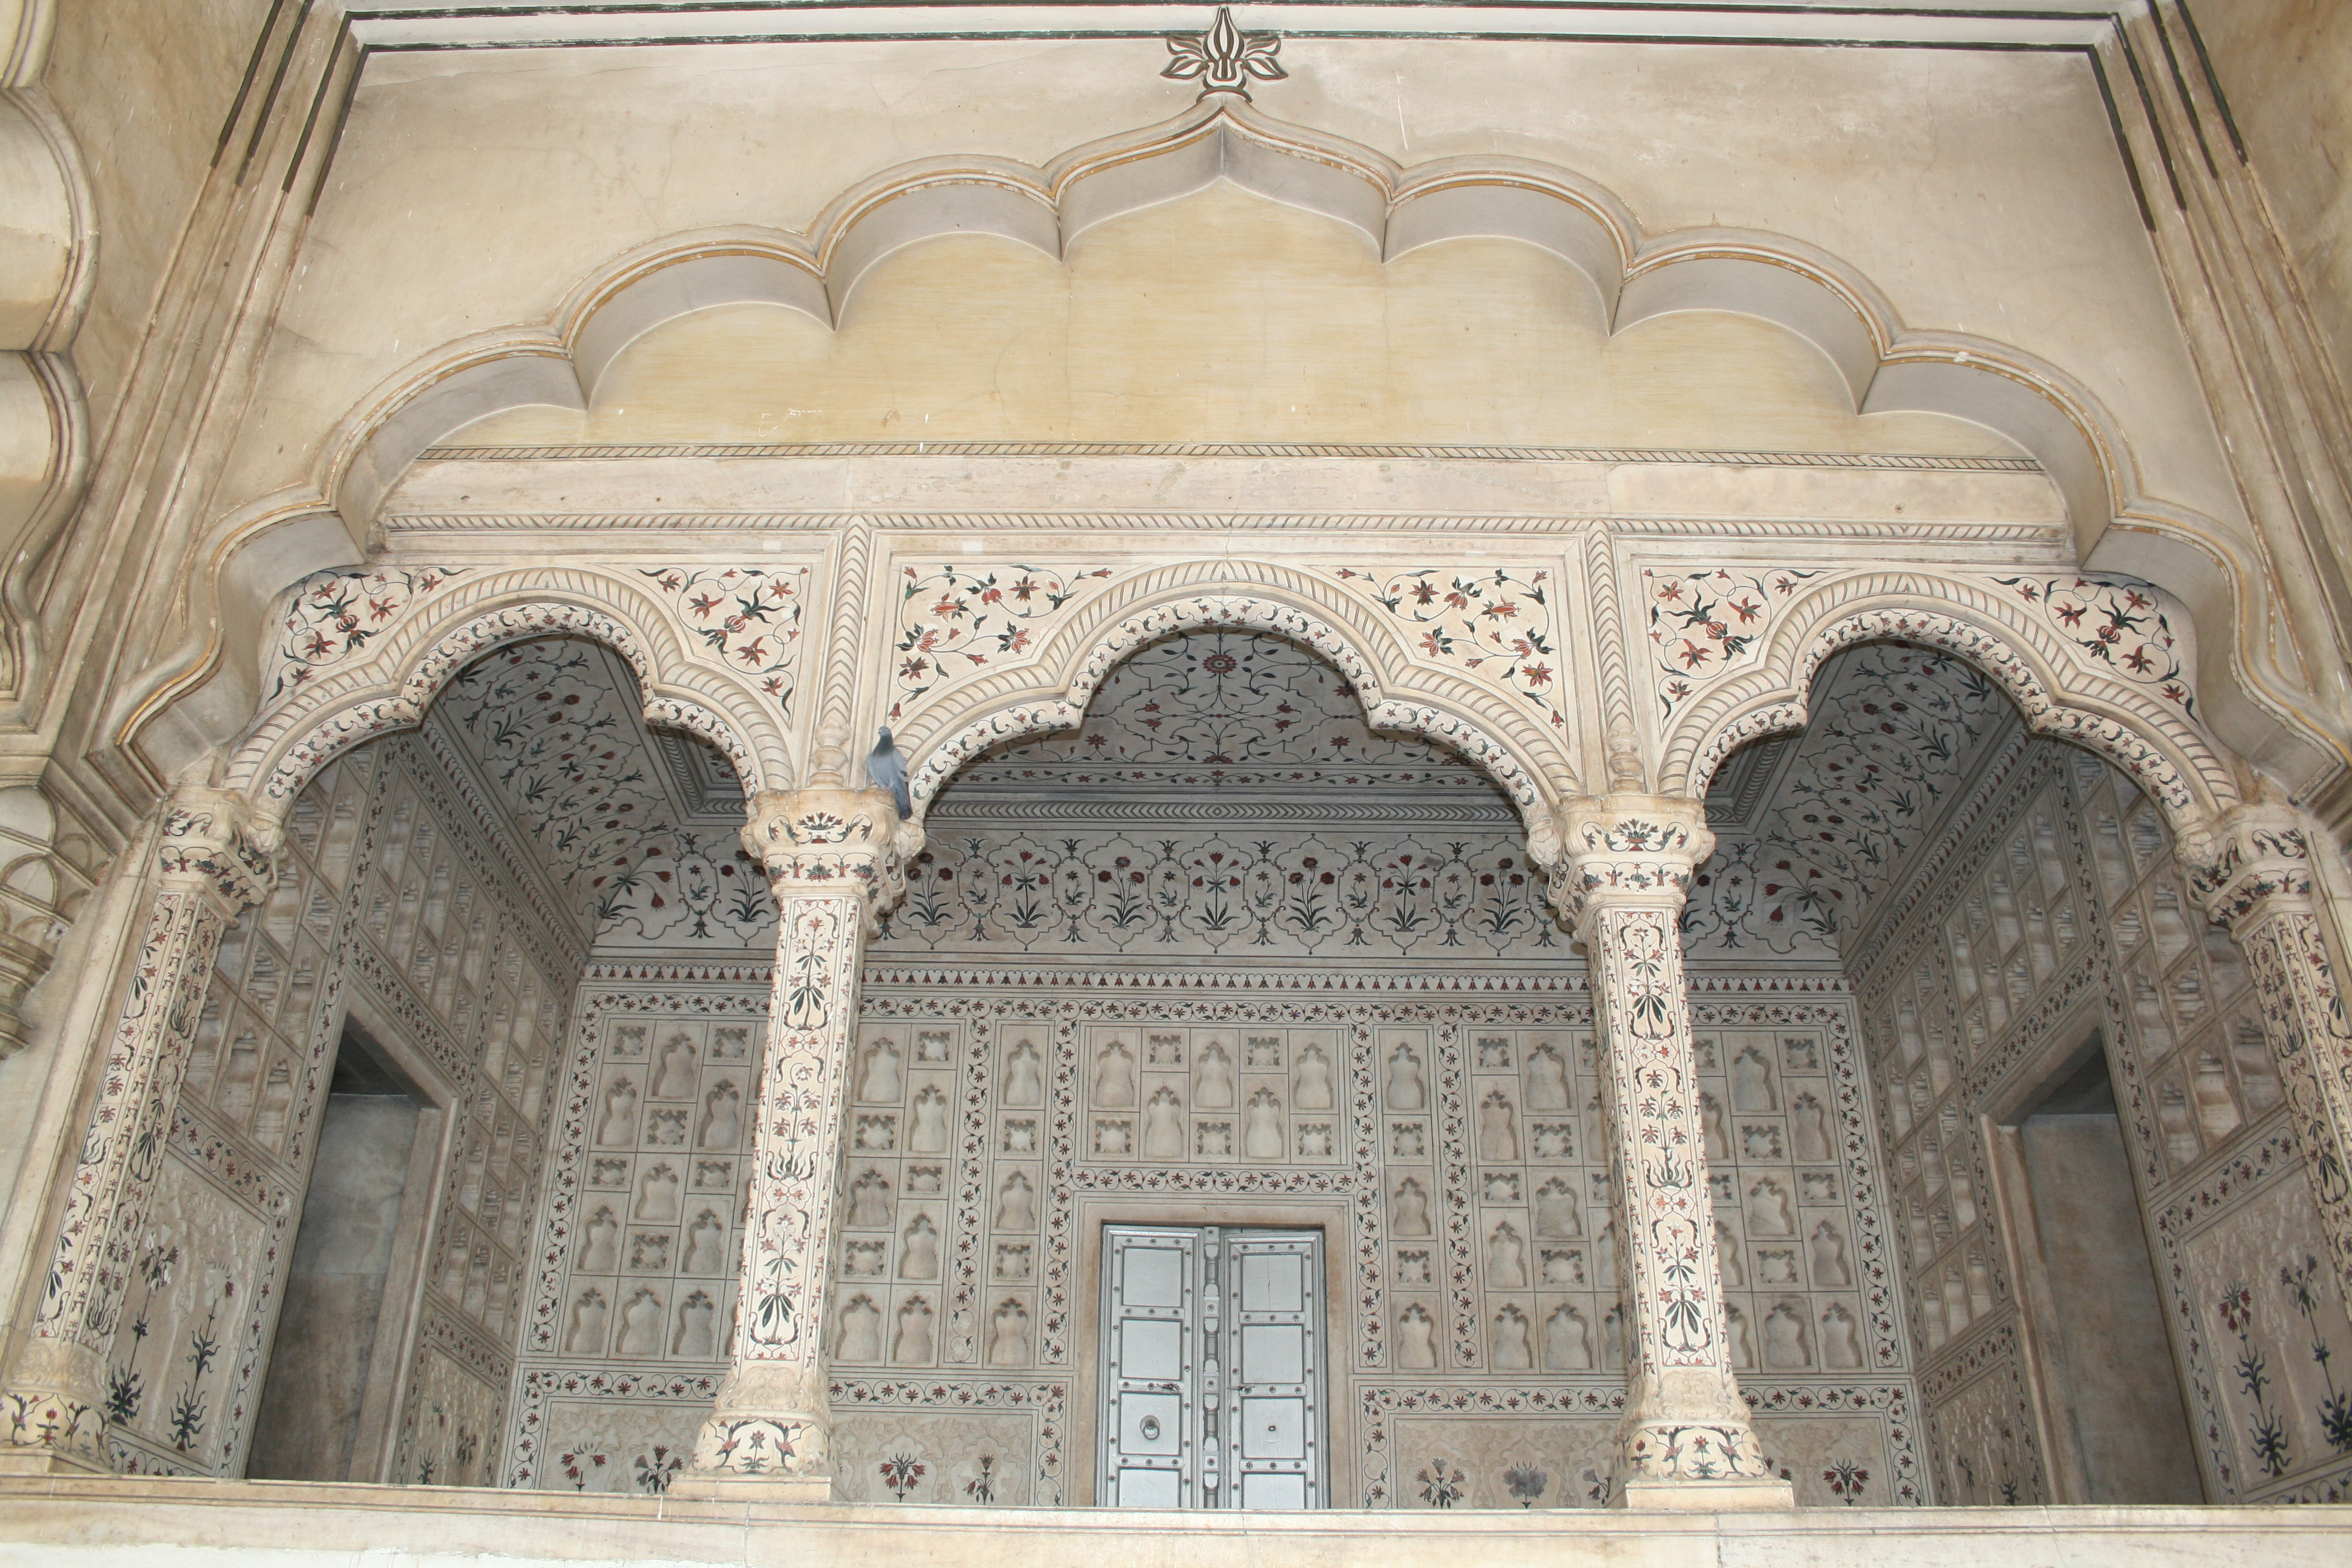 http://s6.picofile.com/file/8197397500/Diwan_i_Am_Red_Fort_Agra_India541620.JPG